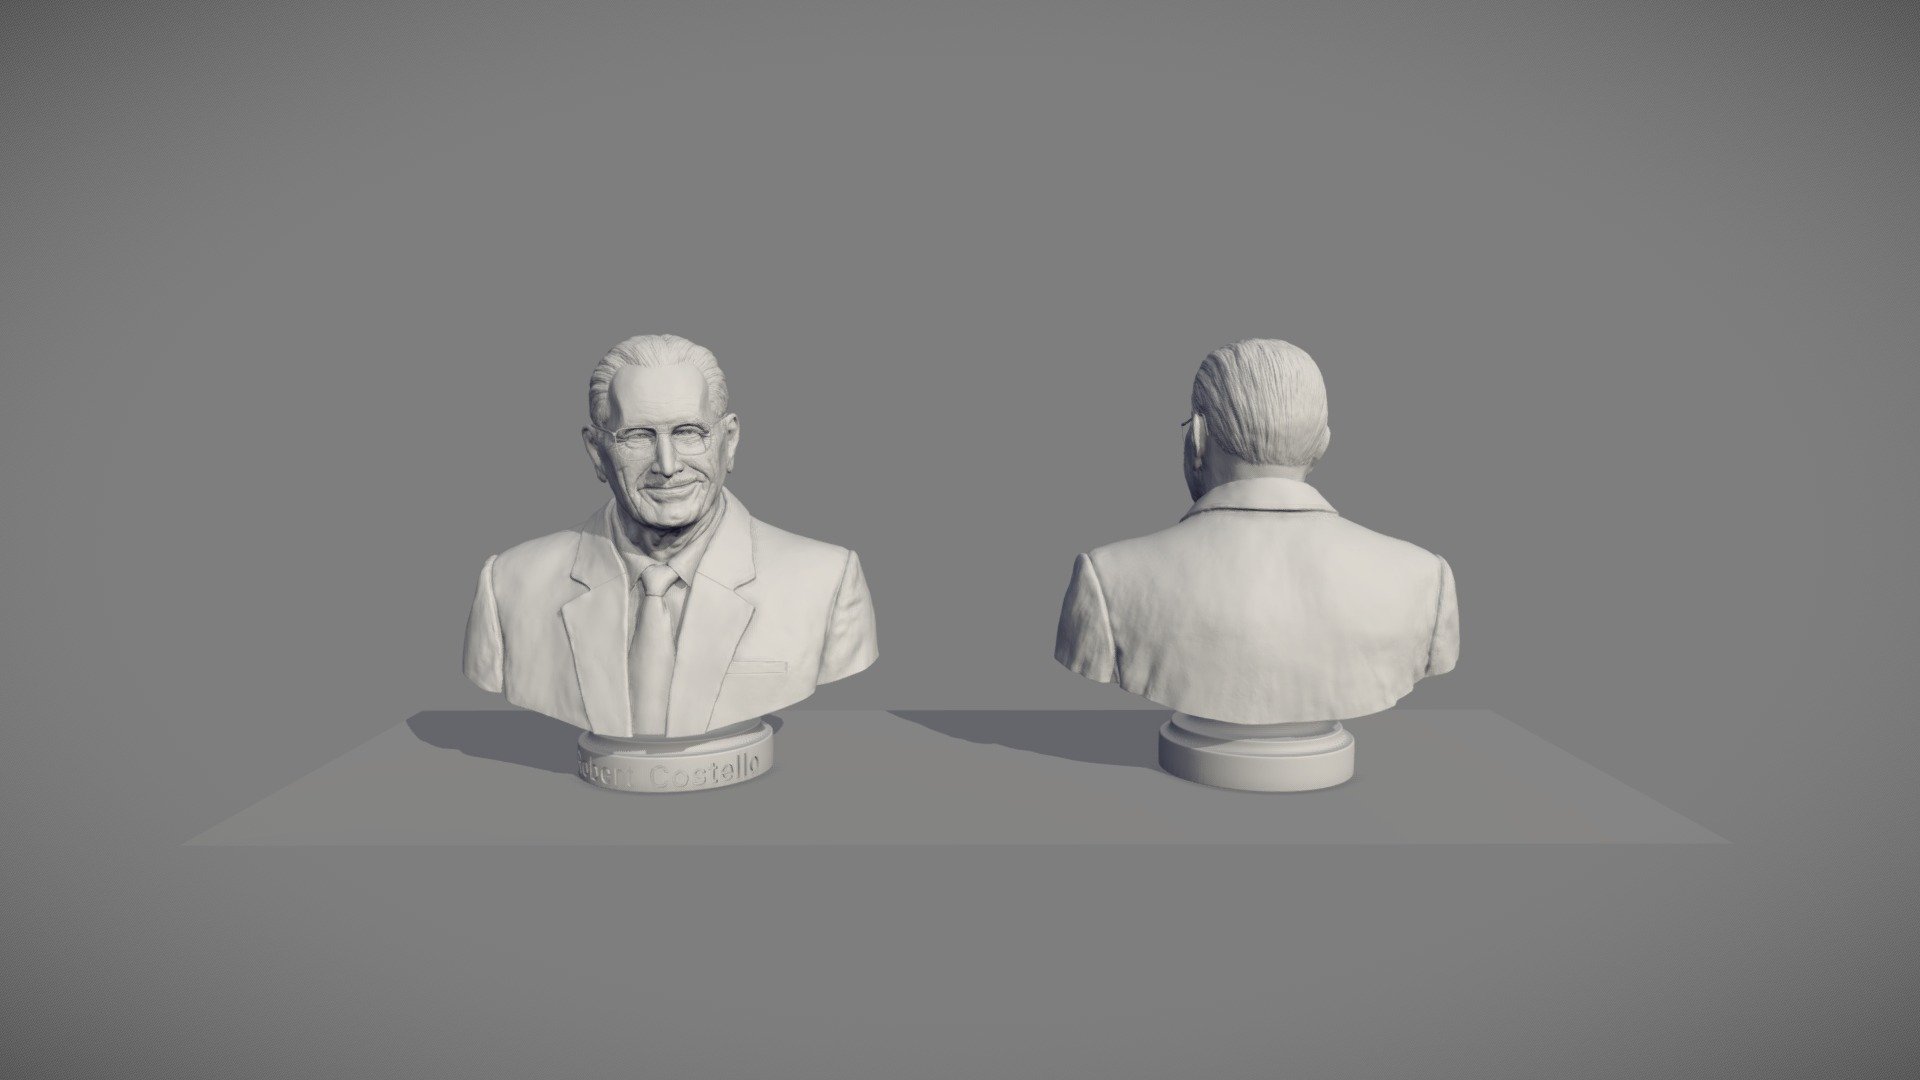 Final Set of Three Busts - Bust Number 1